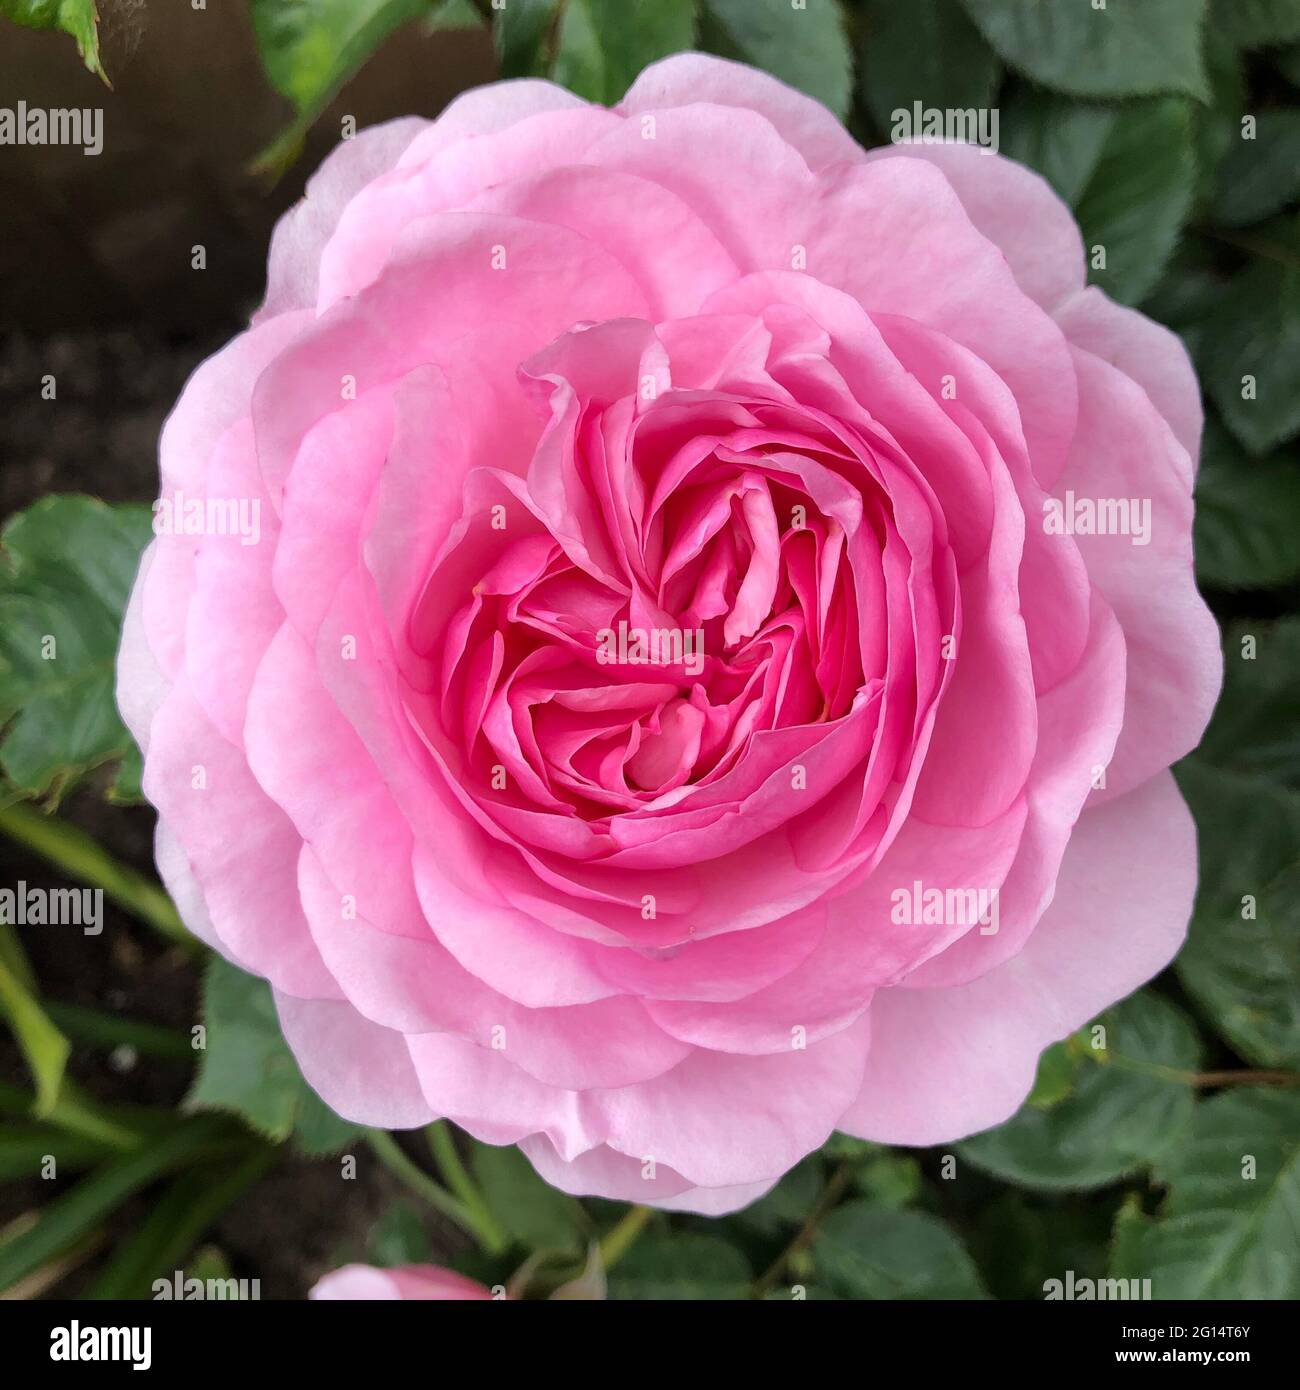 A Close up of the tightly packed petals of a.beautiful pink rose flower head in full bloom with copy space Stock Photo